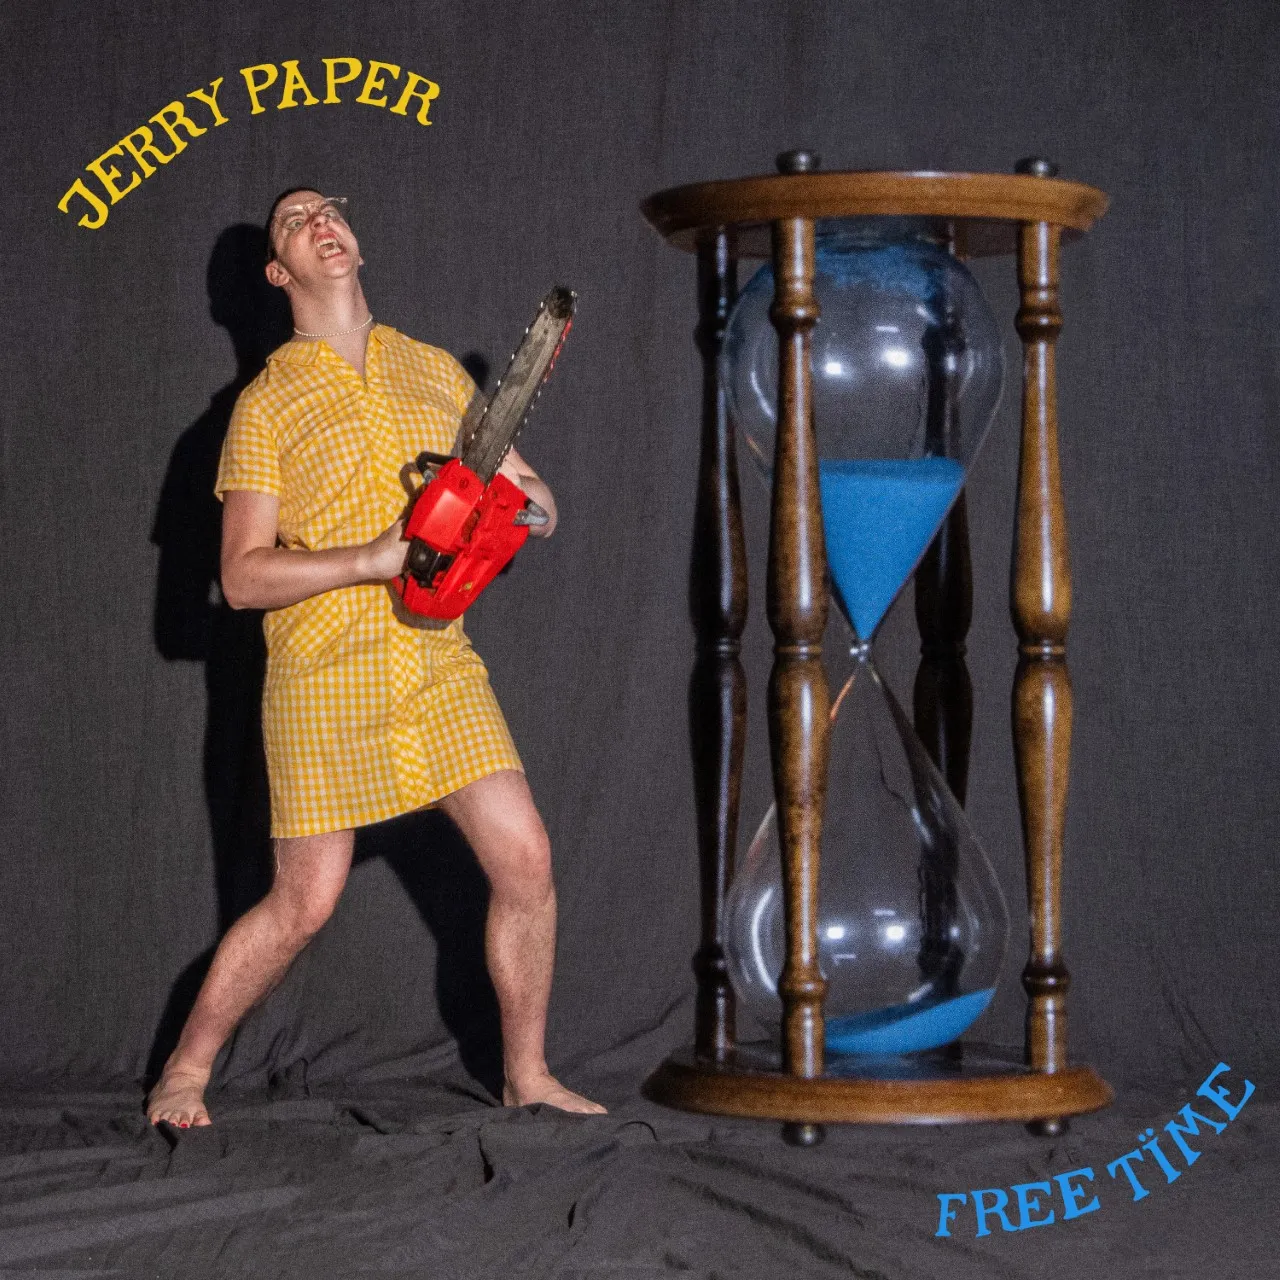 <strong>Jerry Paper - Free Time</strong> (Vinyl LP - black)